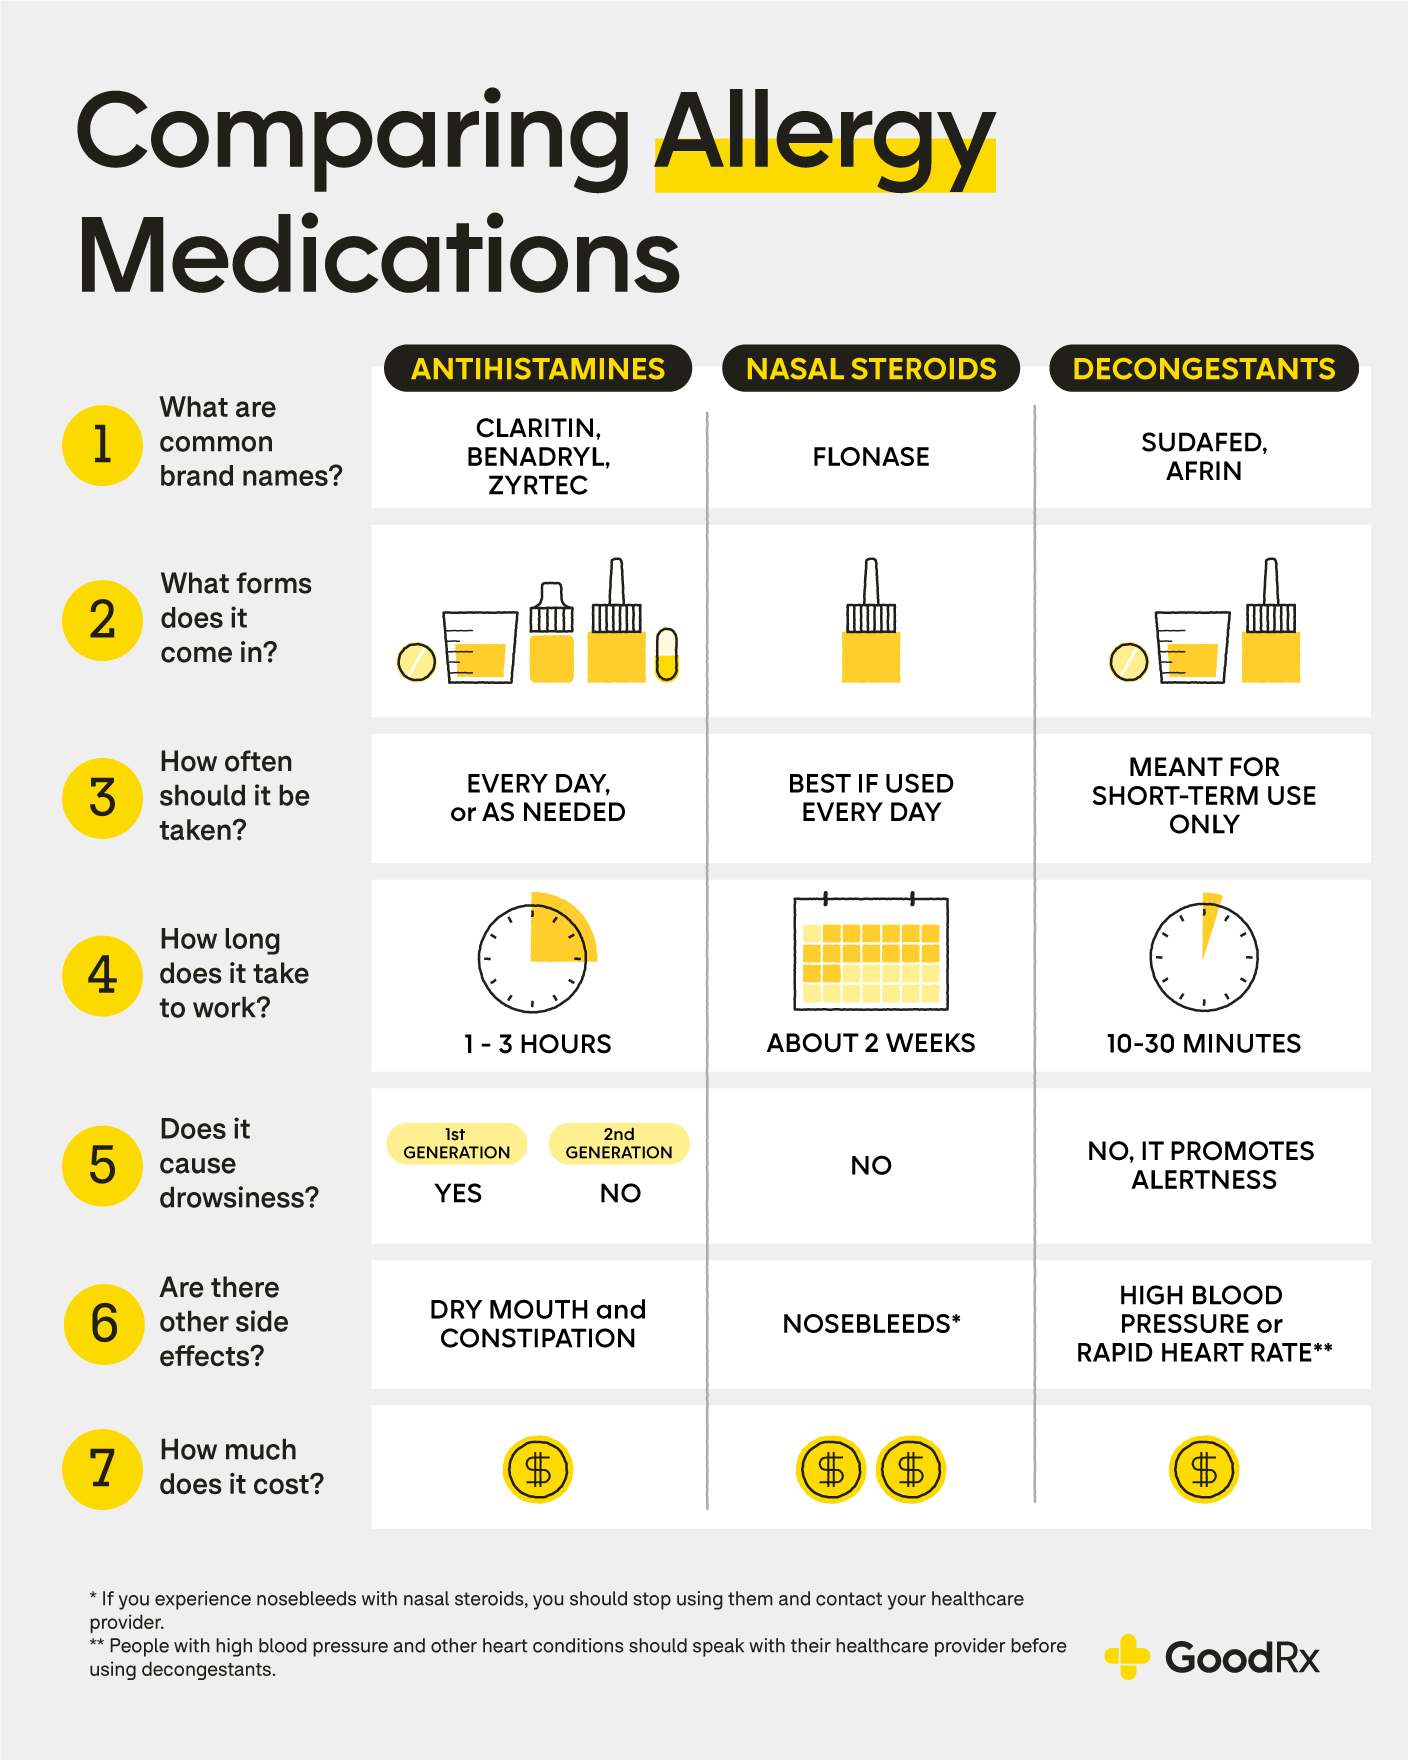 Chart comparing popular allergy medication types: antihistamines, nasal steroids, and decongestants.